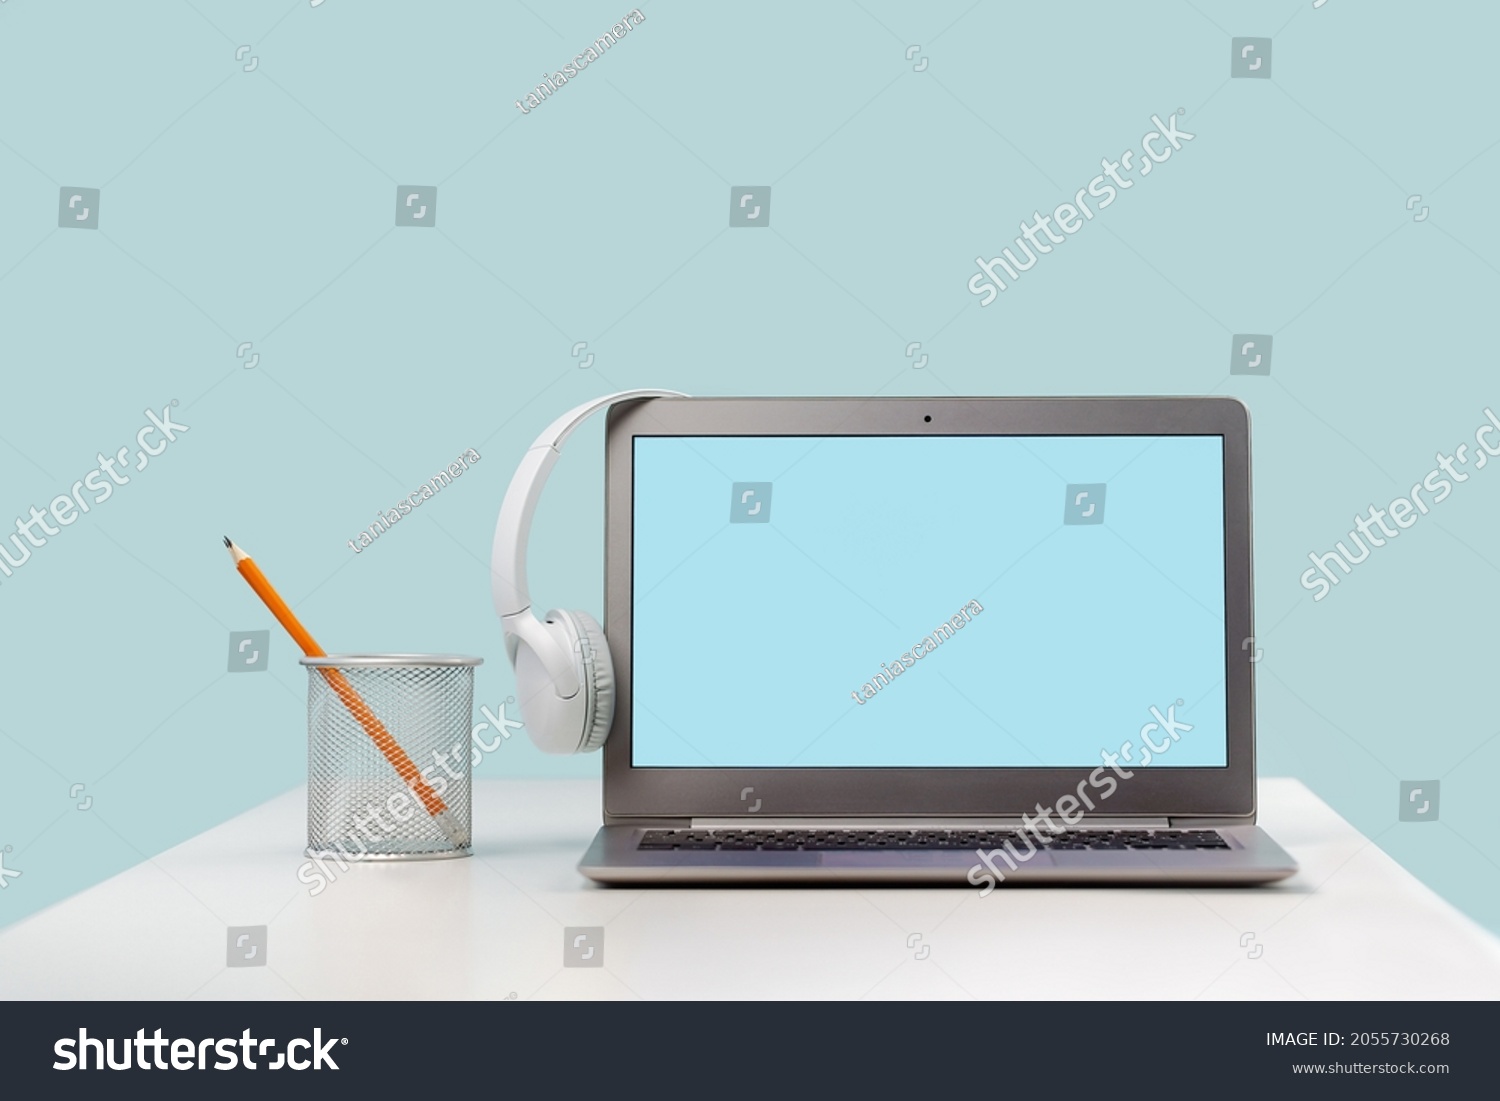 Front view of laptop mockup screen with wireless headphones on office desk. Pencils. Blue background. Distant learning. working from home, online courses or support. podcast. Helpdesk or call center #2055730268